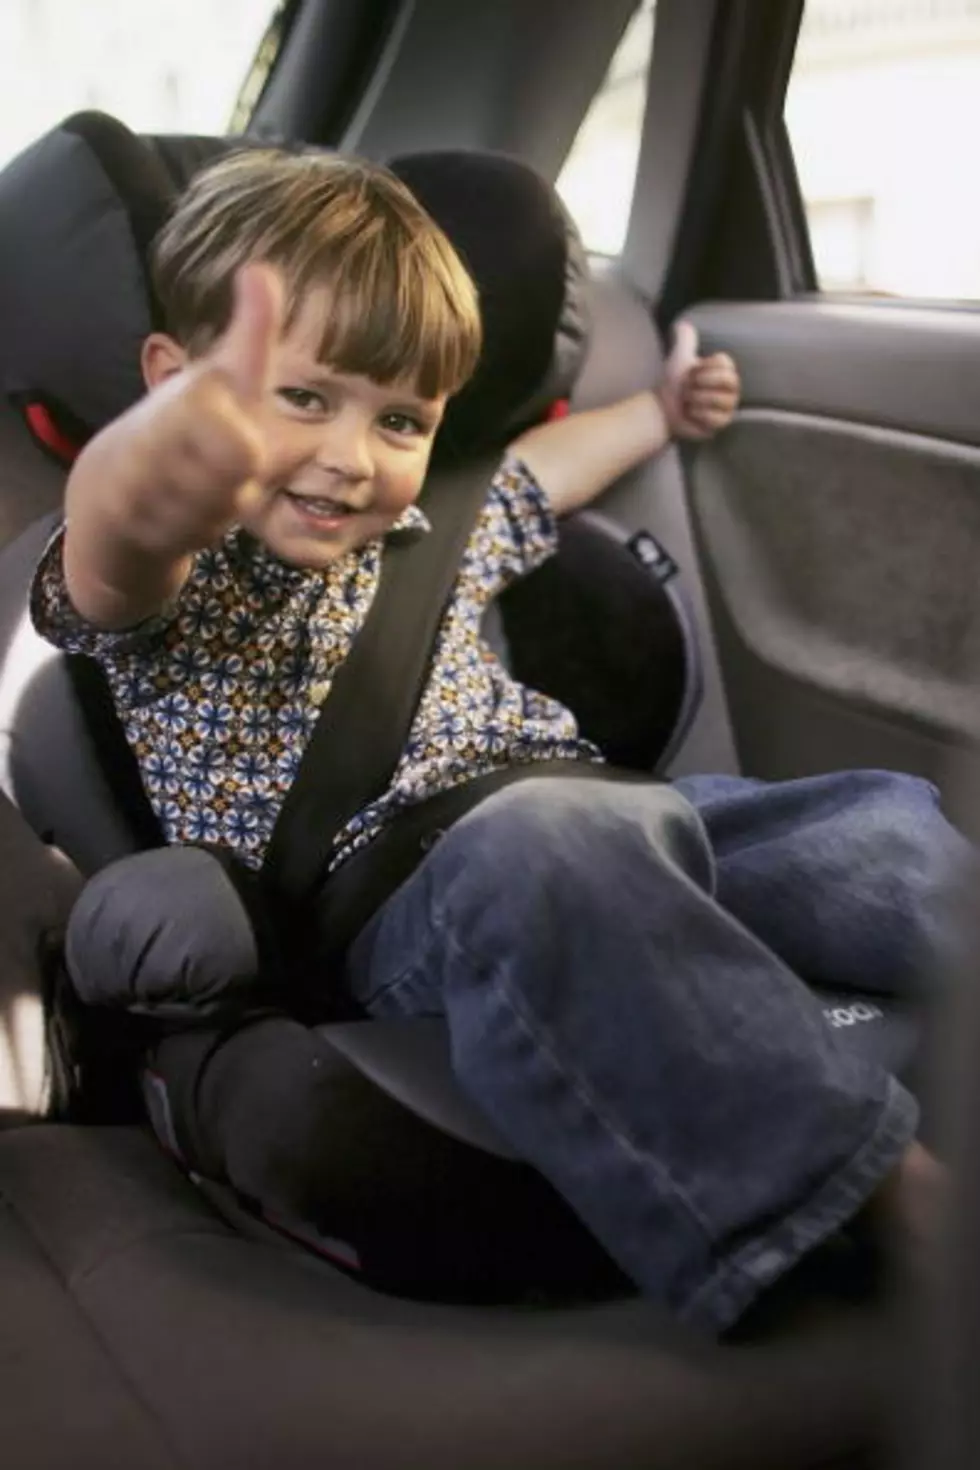 Kids Will Need To Stay In Rear-Facing Seats Until They're 2